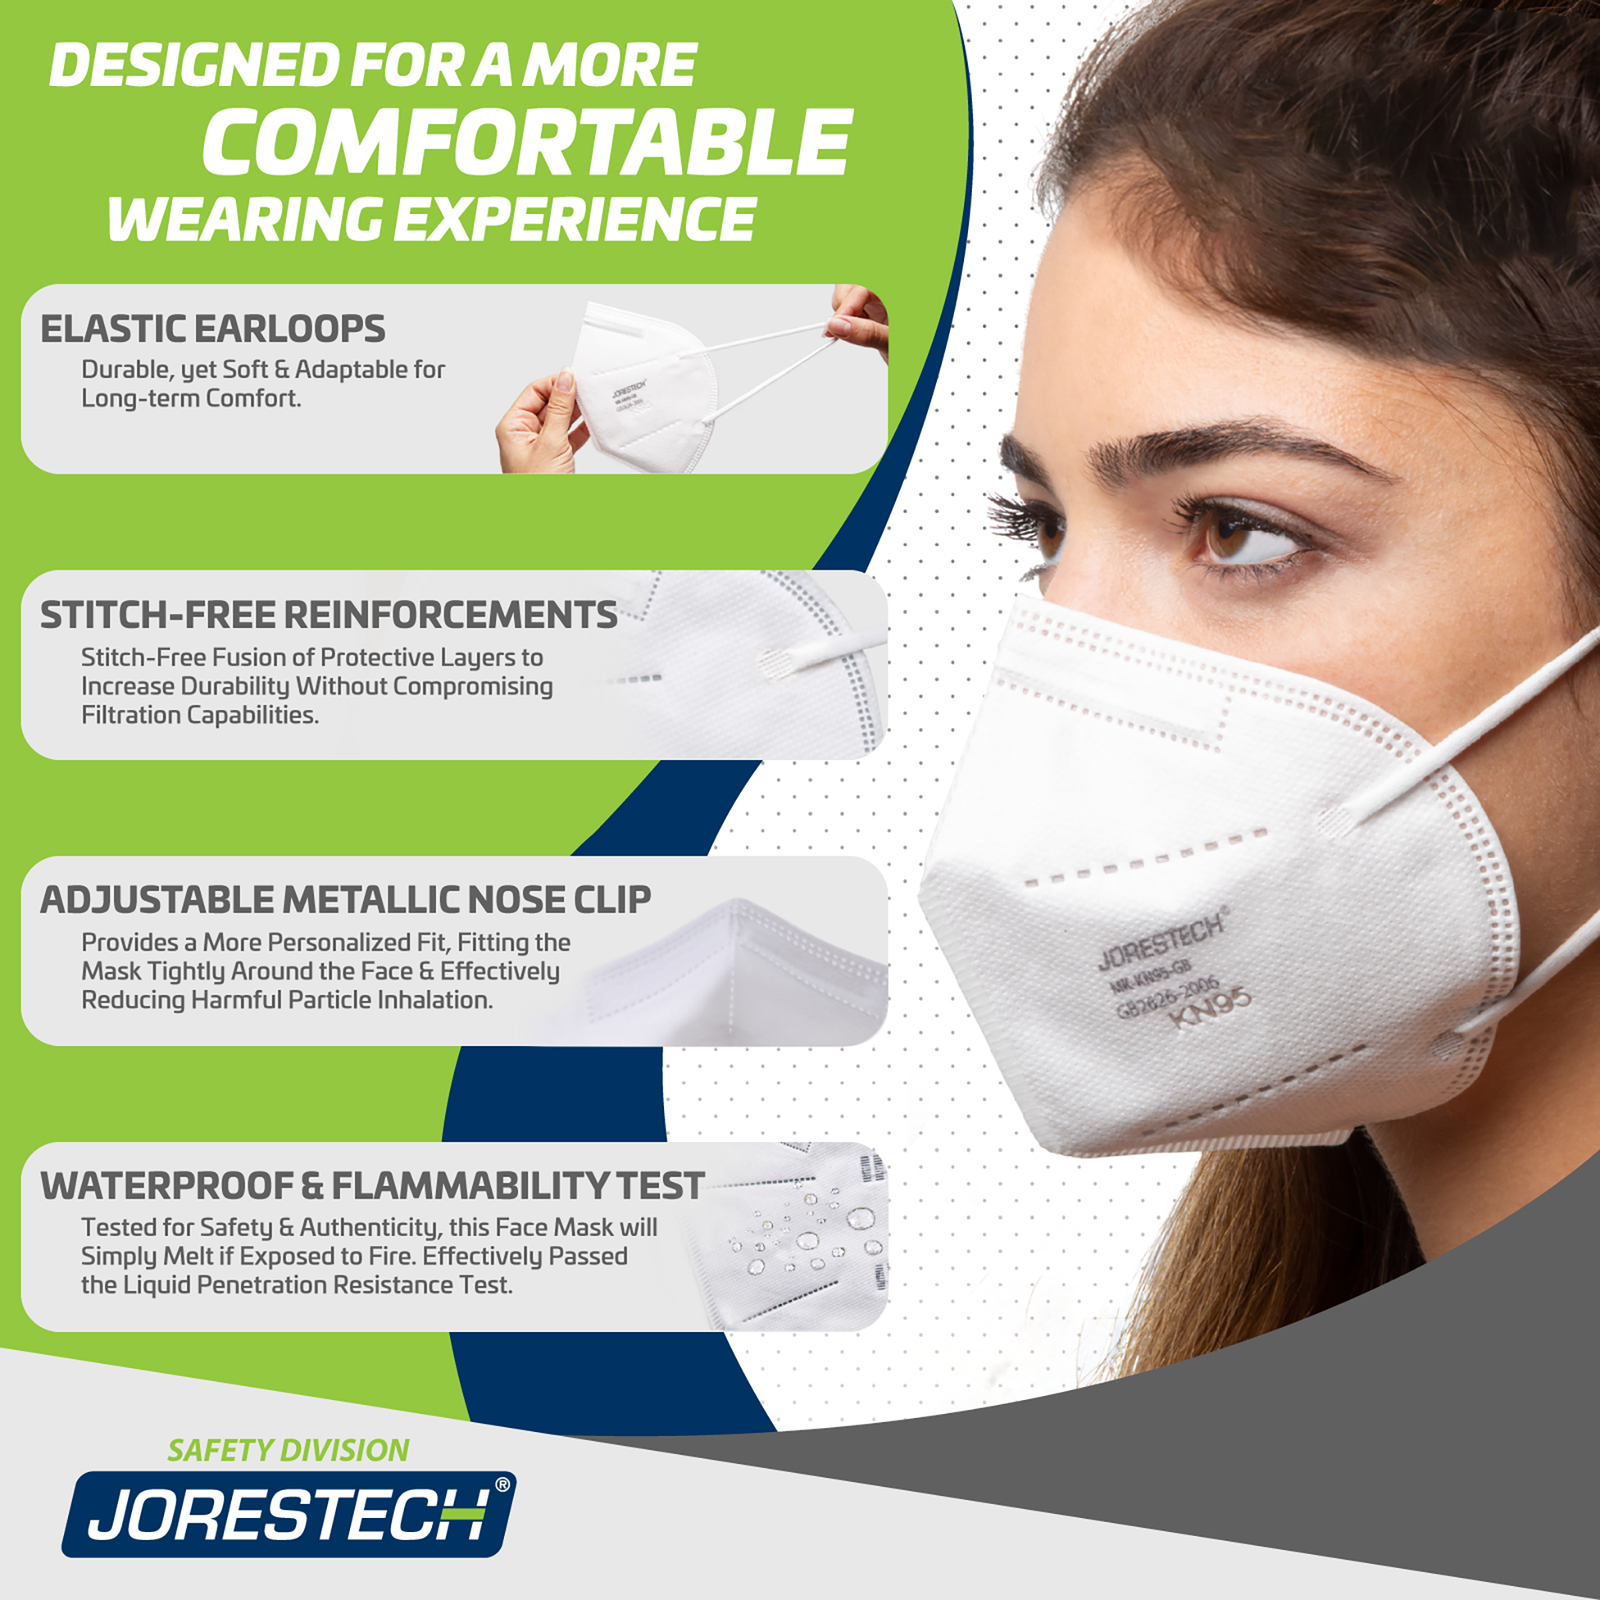 Woman wearing a face masks. Text reads: designed for a more comfortable wearing experience. Elastic ear loops, Stitch free reinforcements. adjustable metallic nose clip, waterproof & flammability tested 